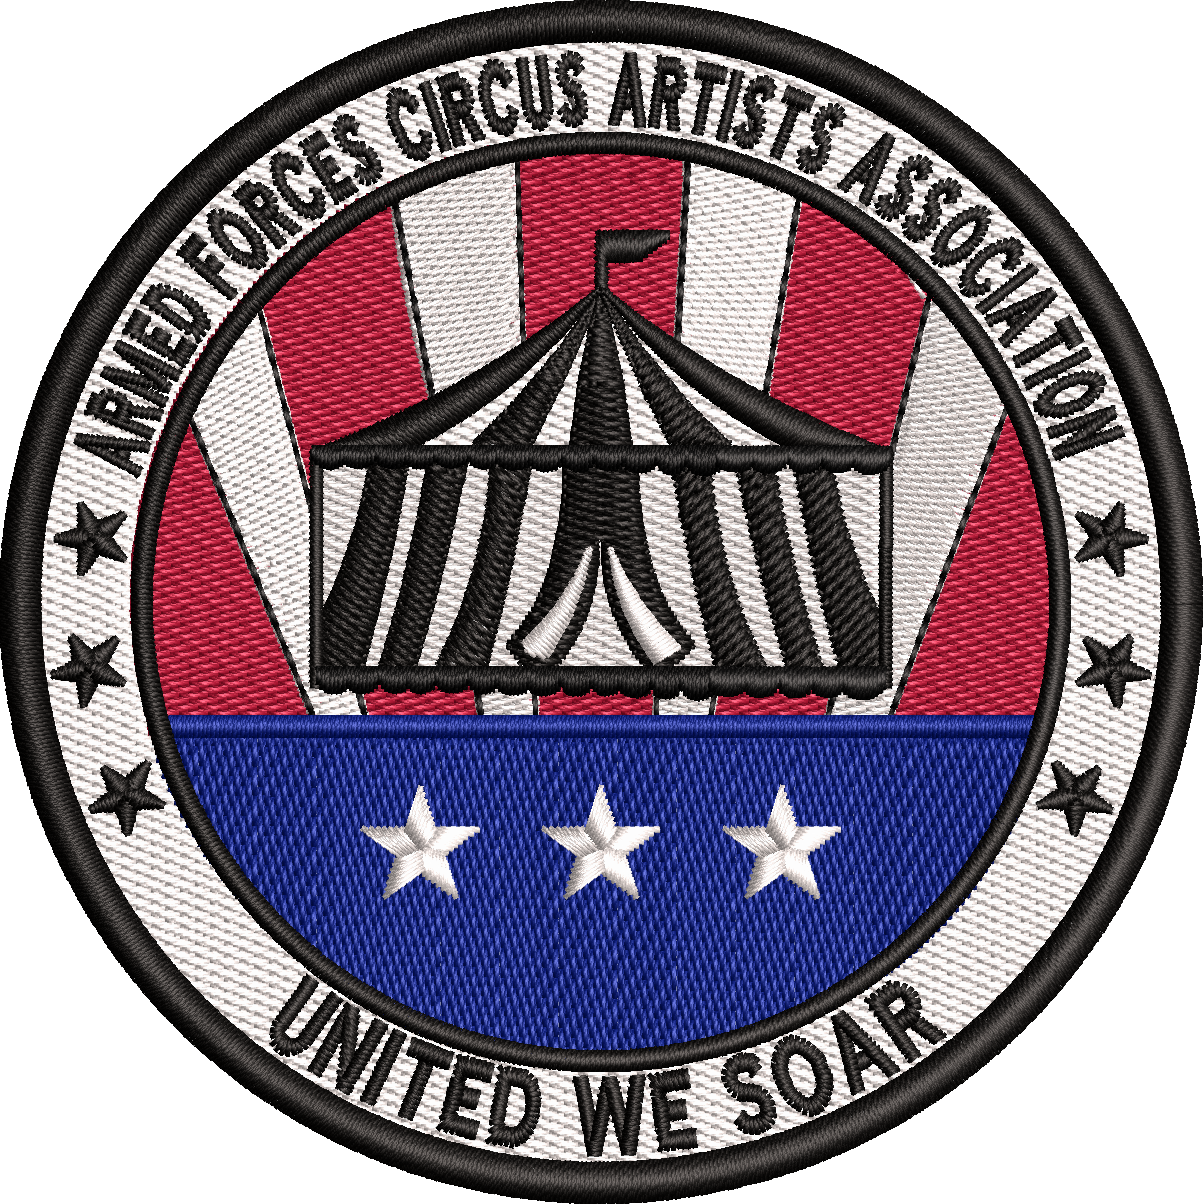 Armed Forces Circus Artists Association